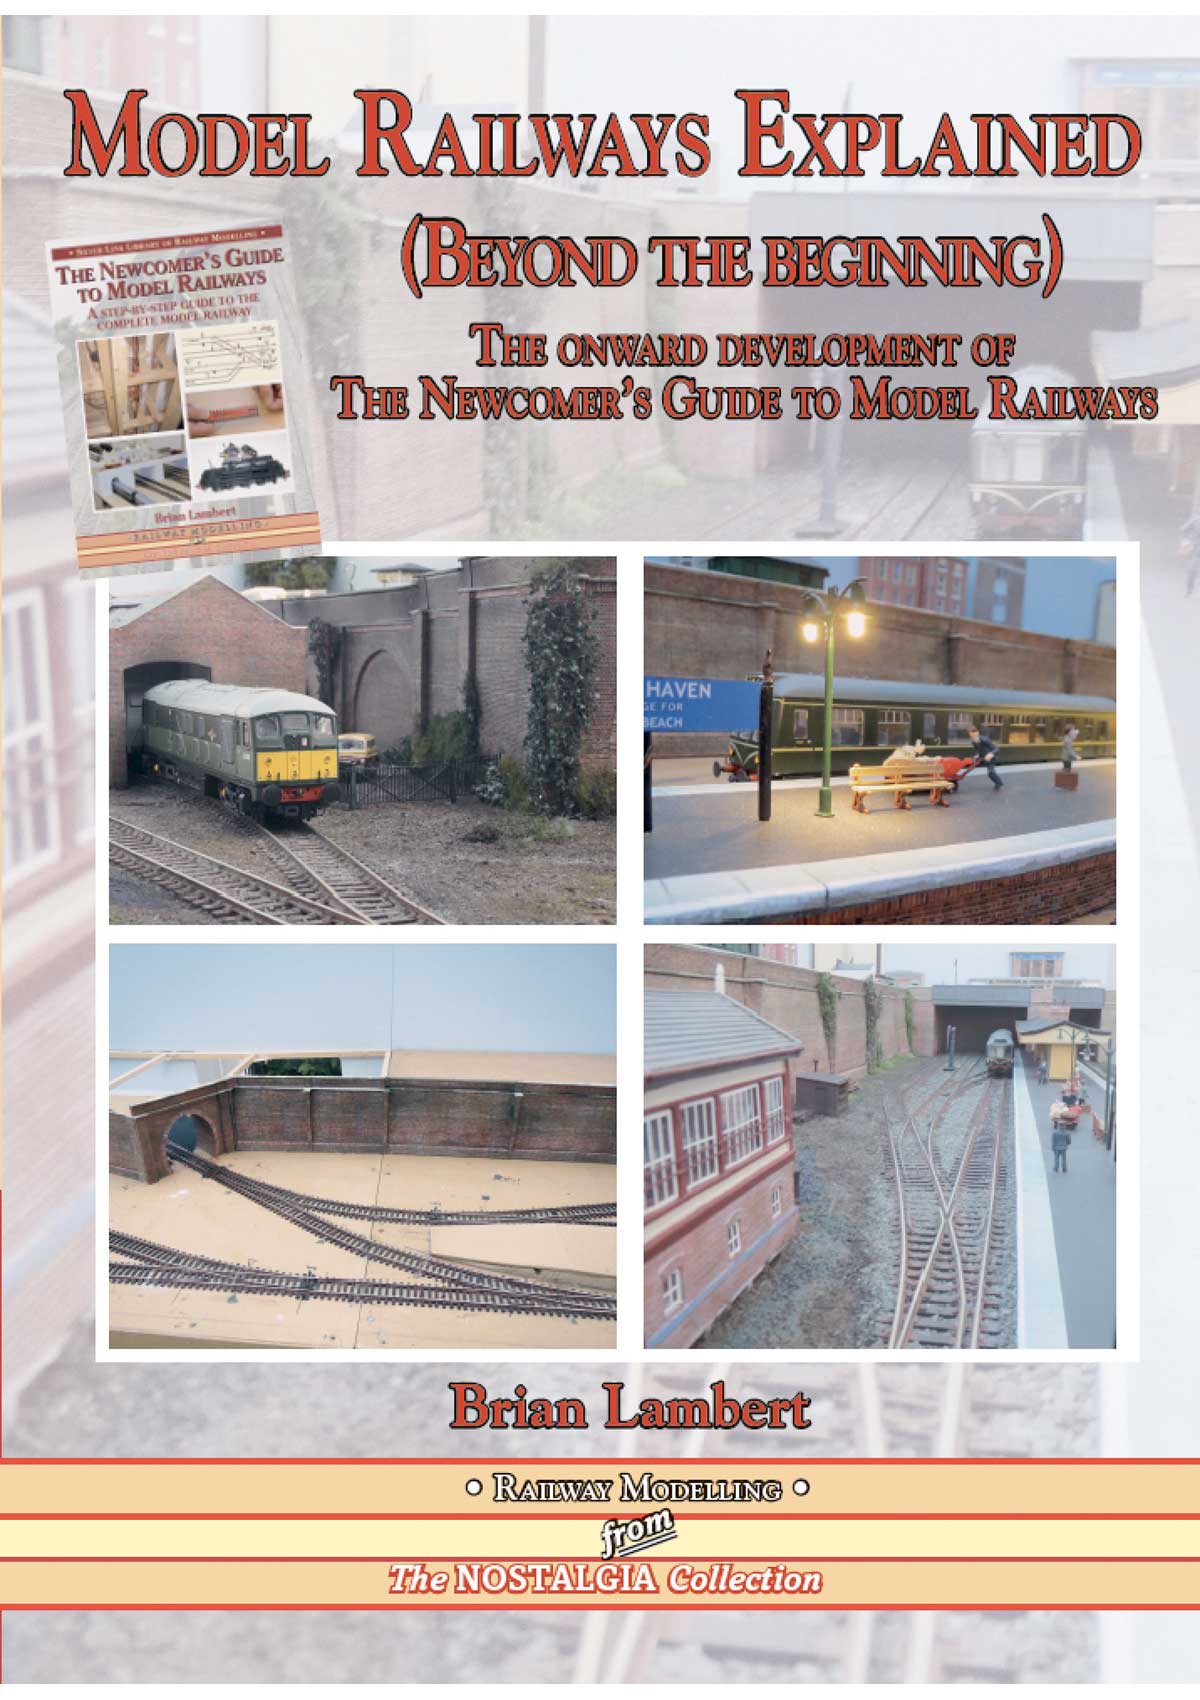 5454- Model R/ways Explained Beyond the Beginning The onward development of The Newcomers Guide to Model Railways